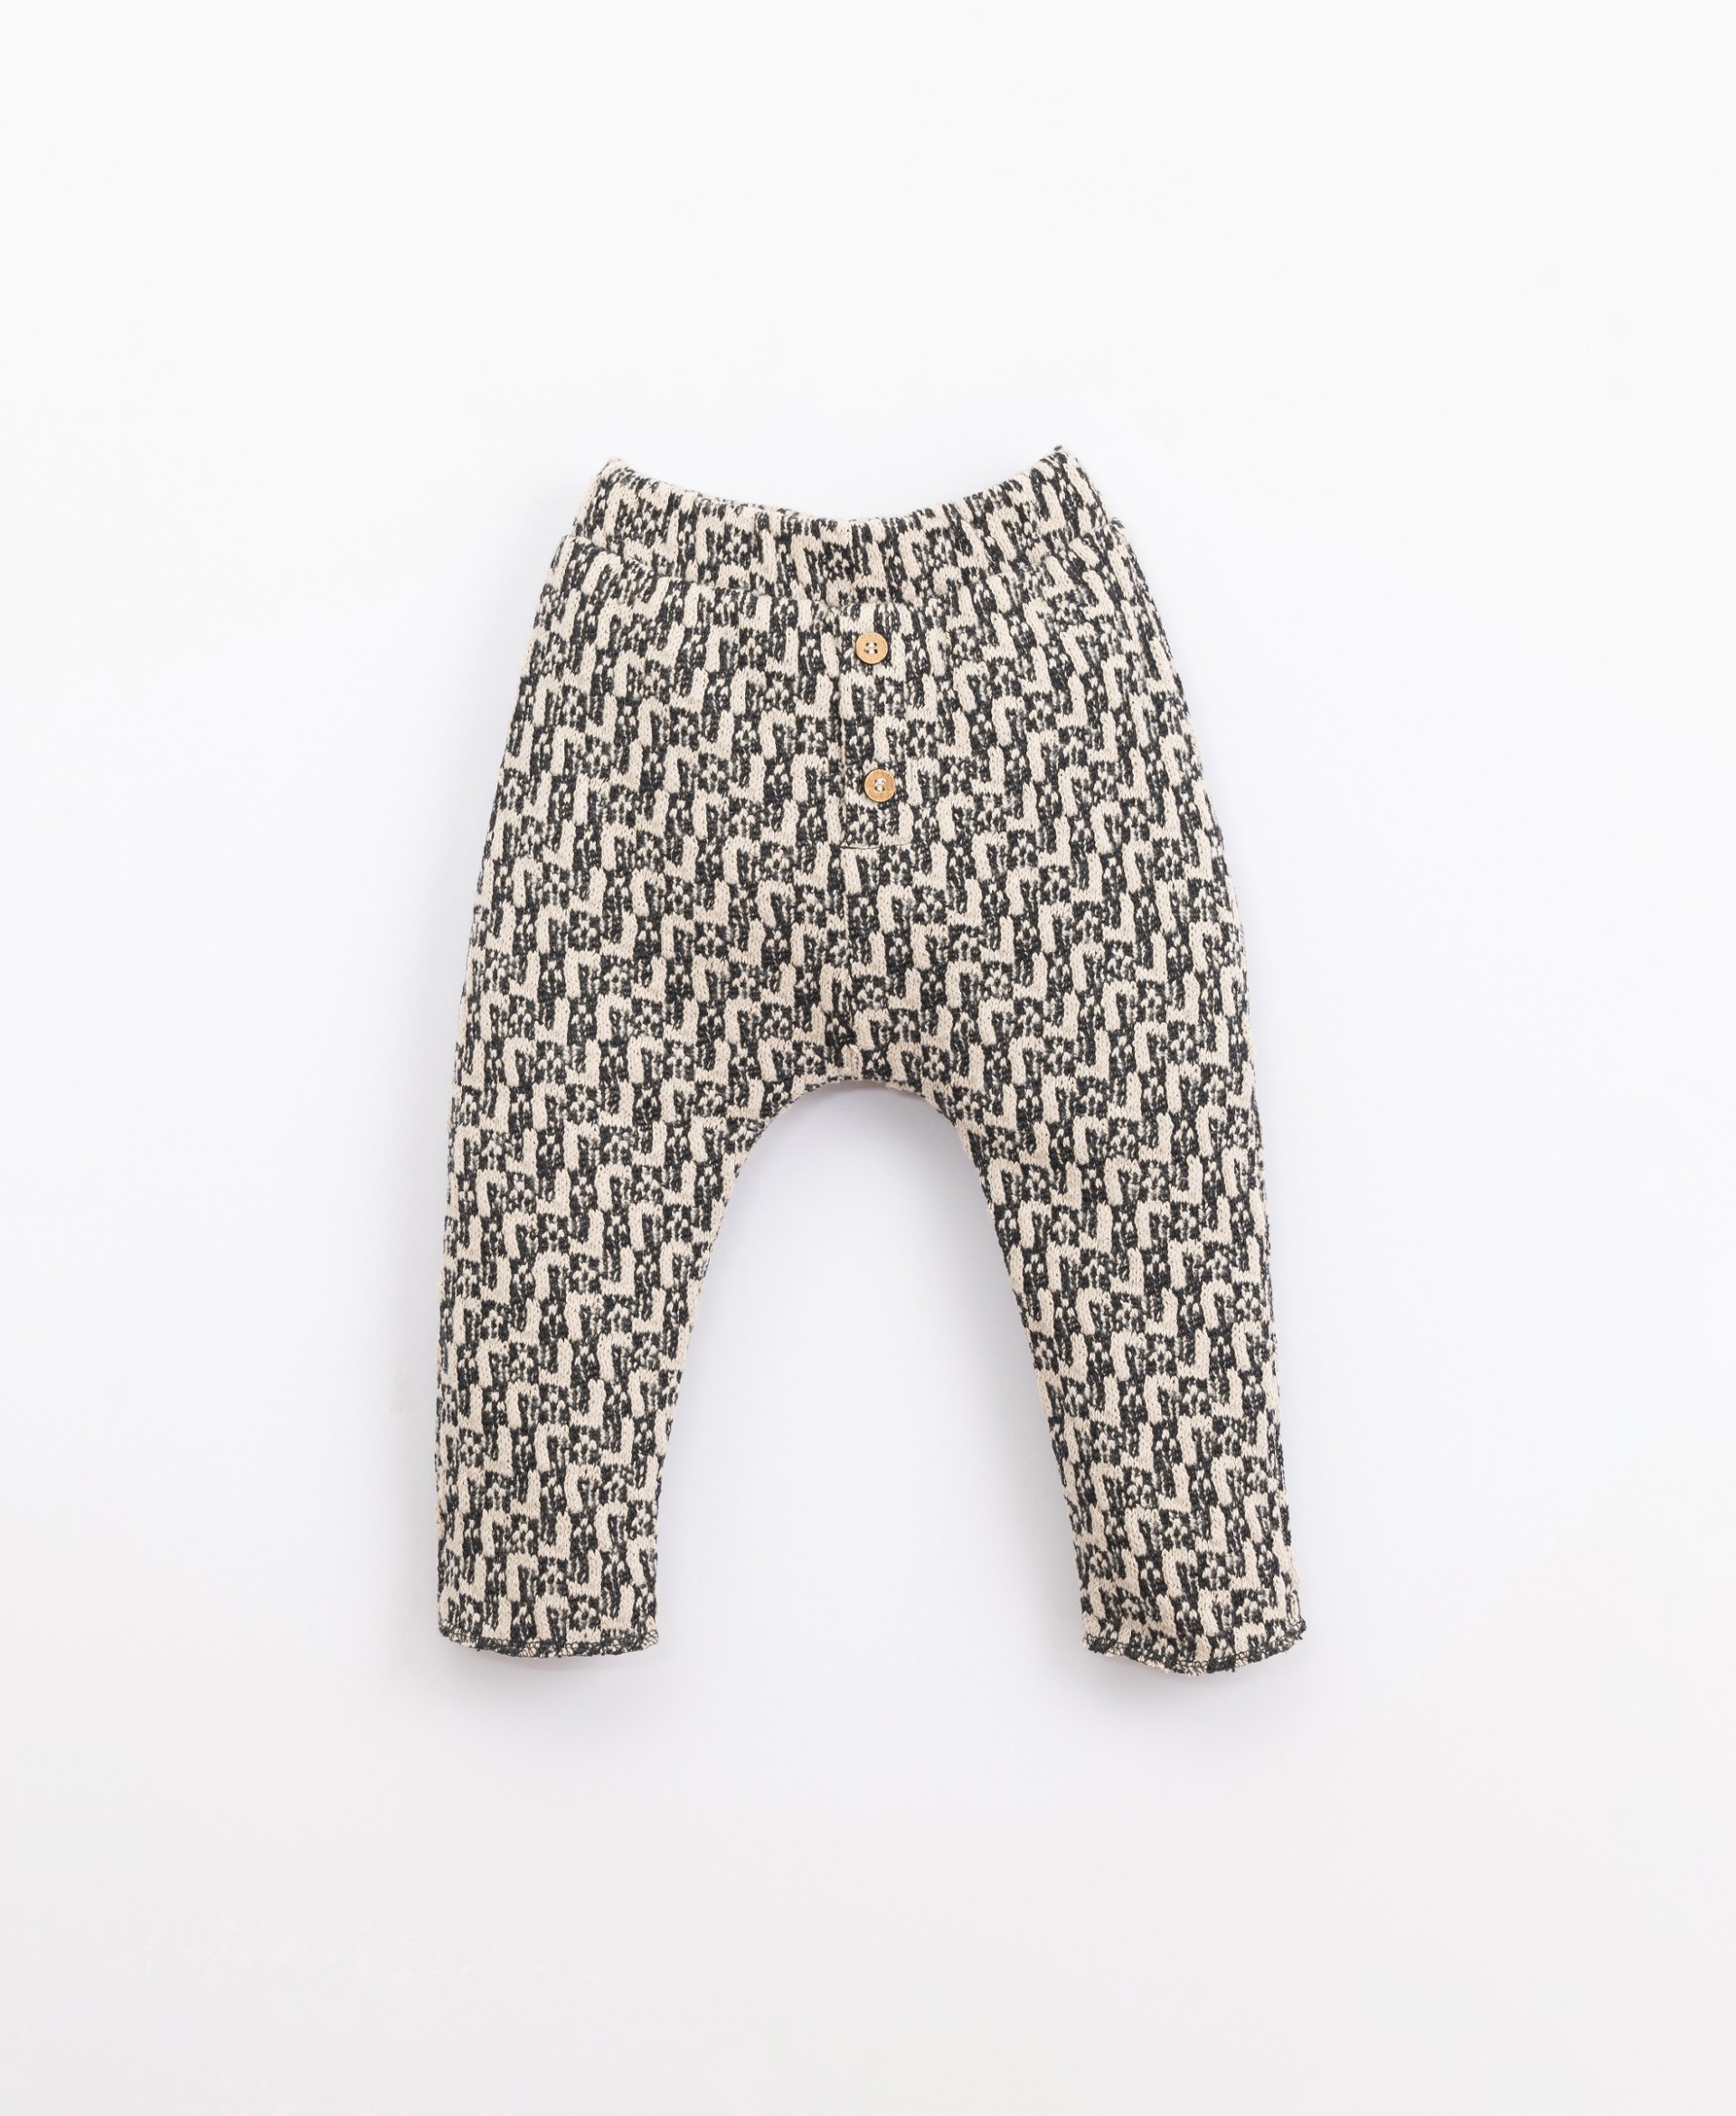 Cotton trousers with decorative buttons| Illustration